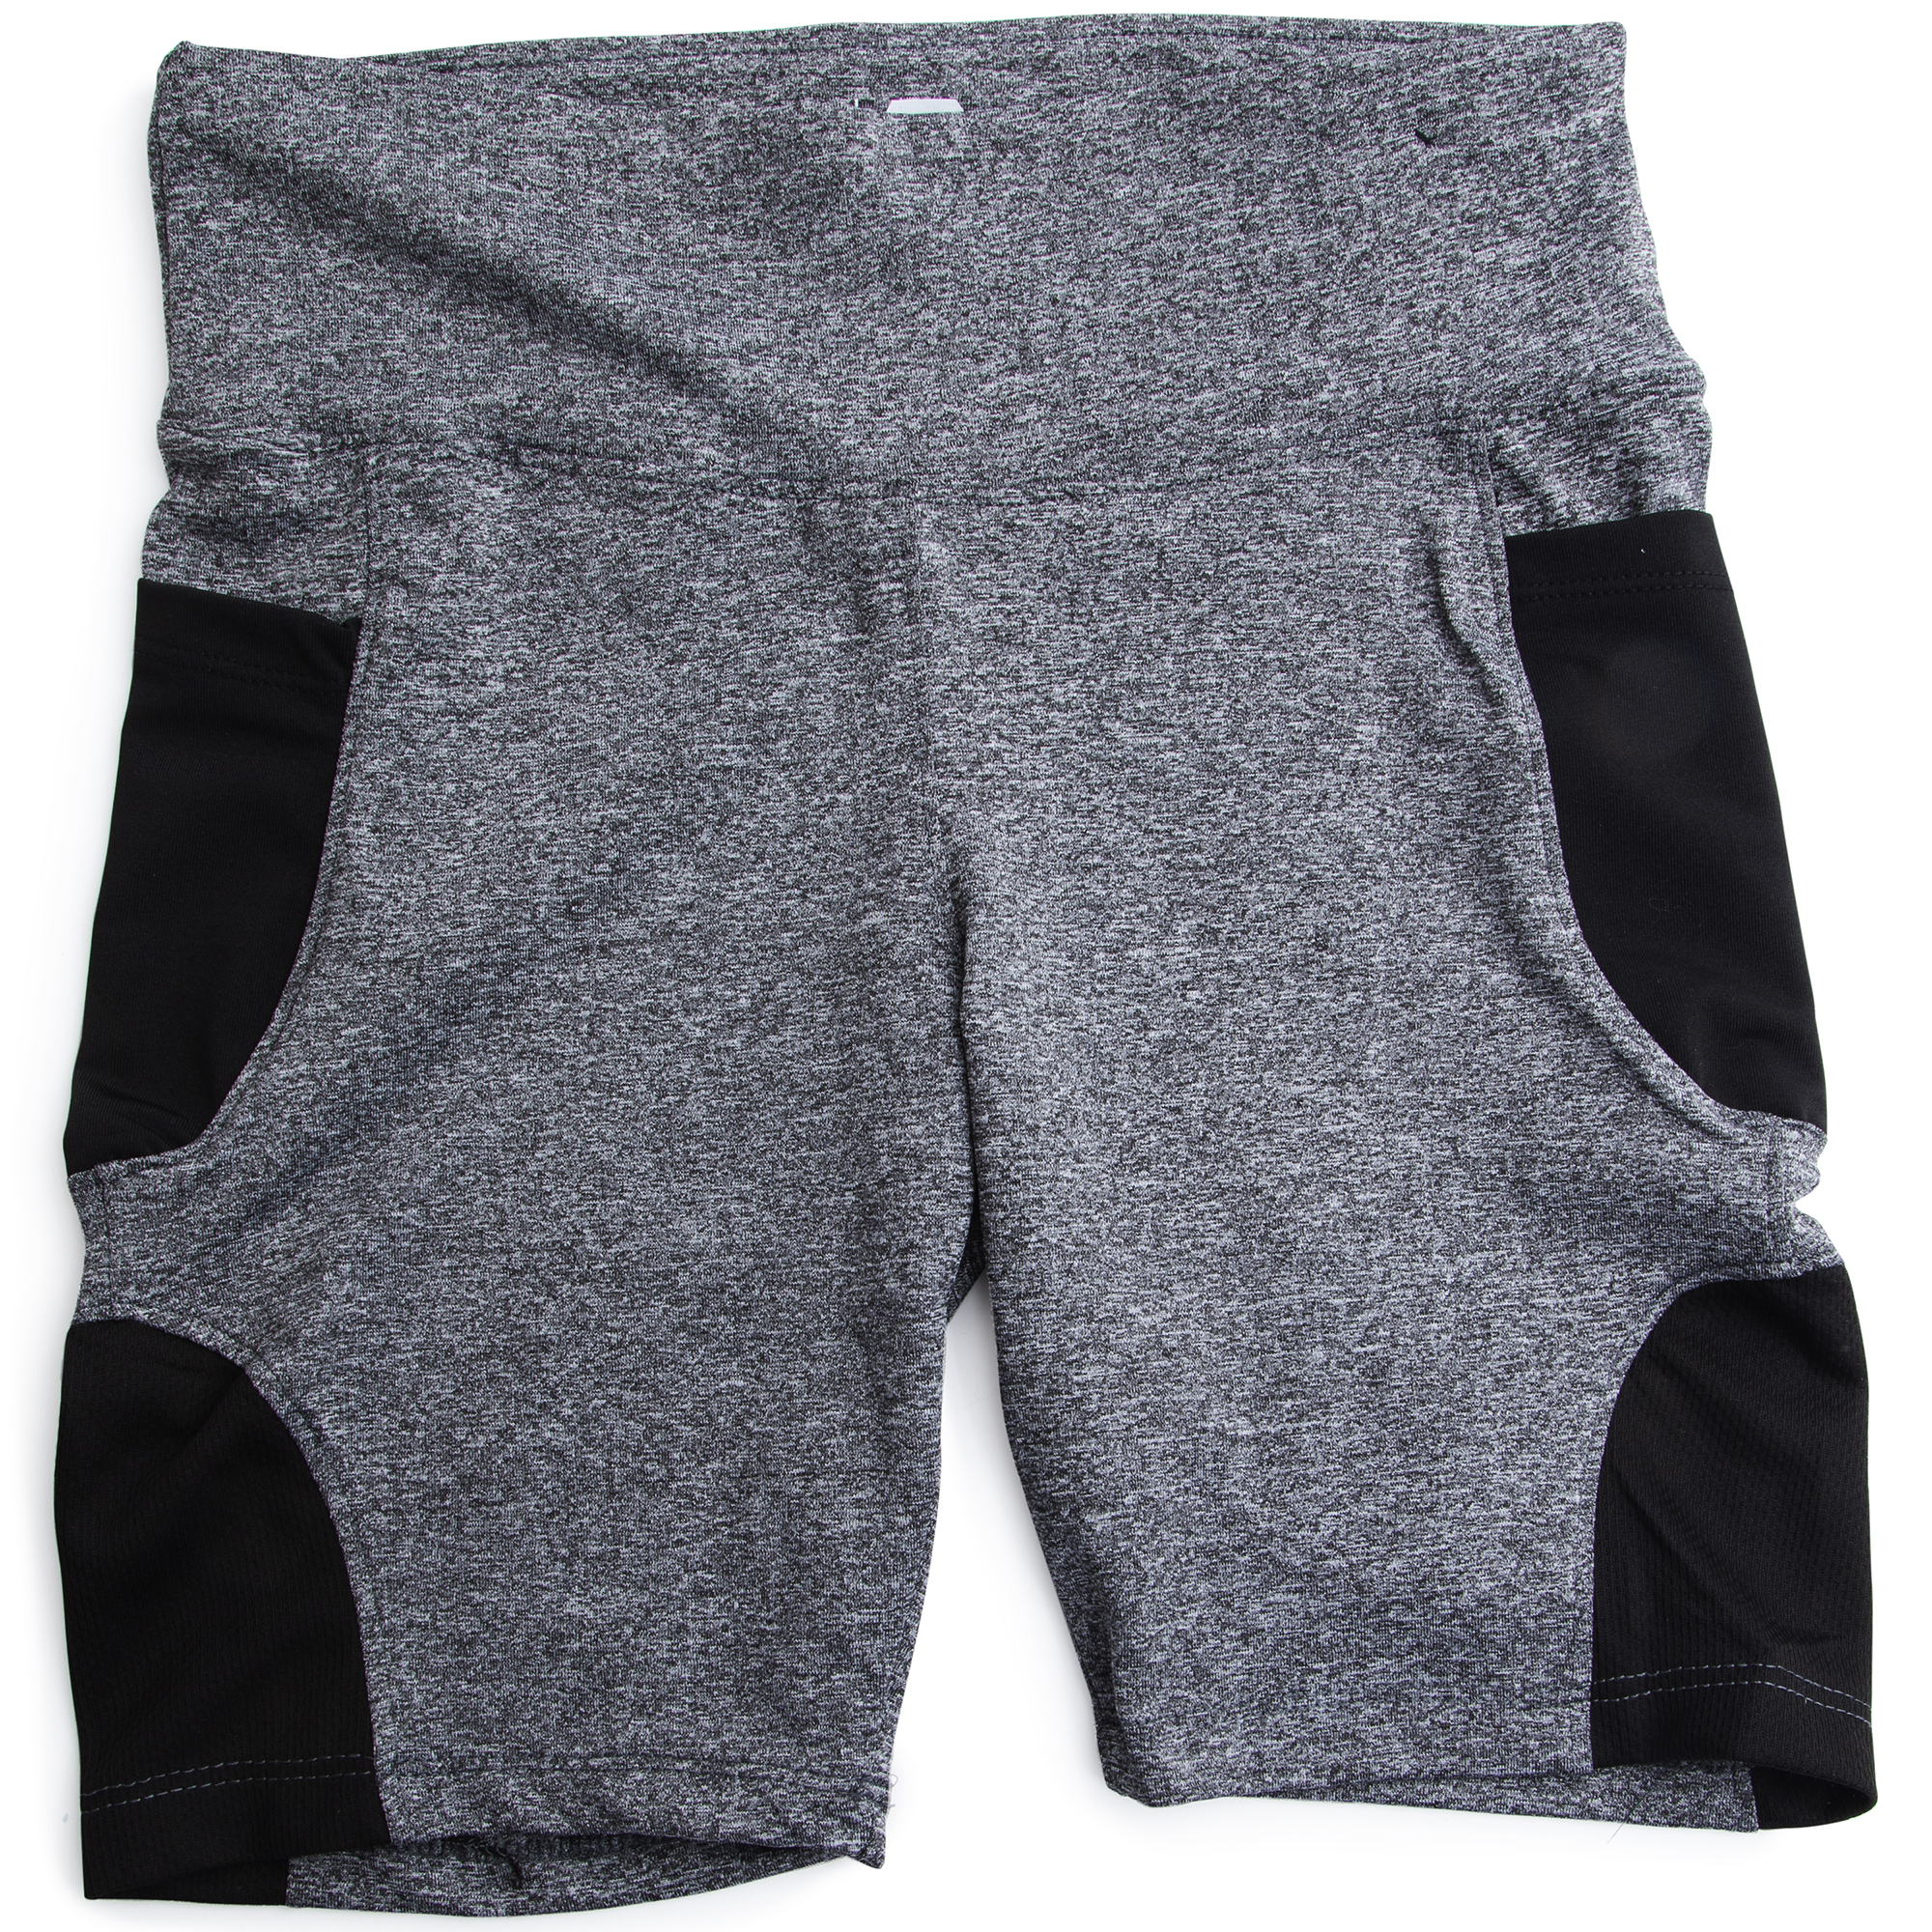 series-8 fitness™ gray mesh bike shorts with pockets